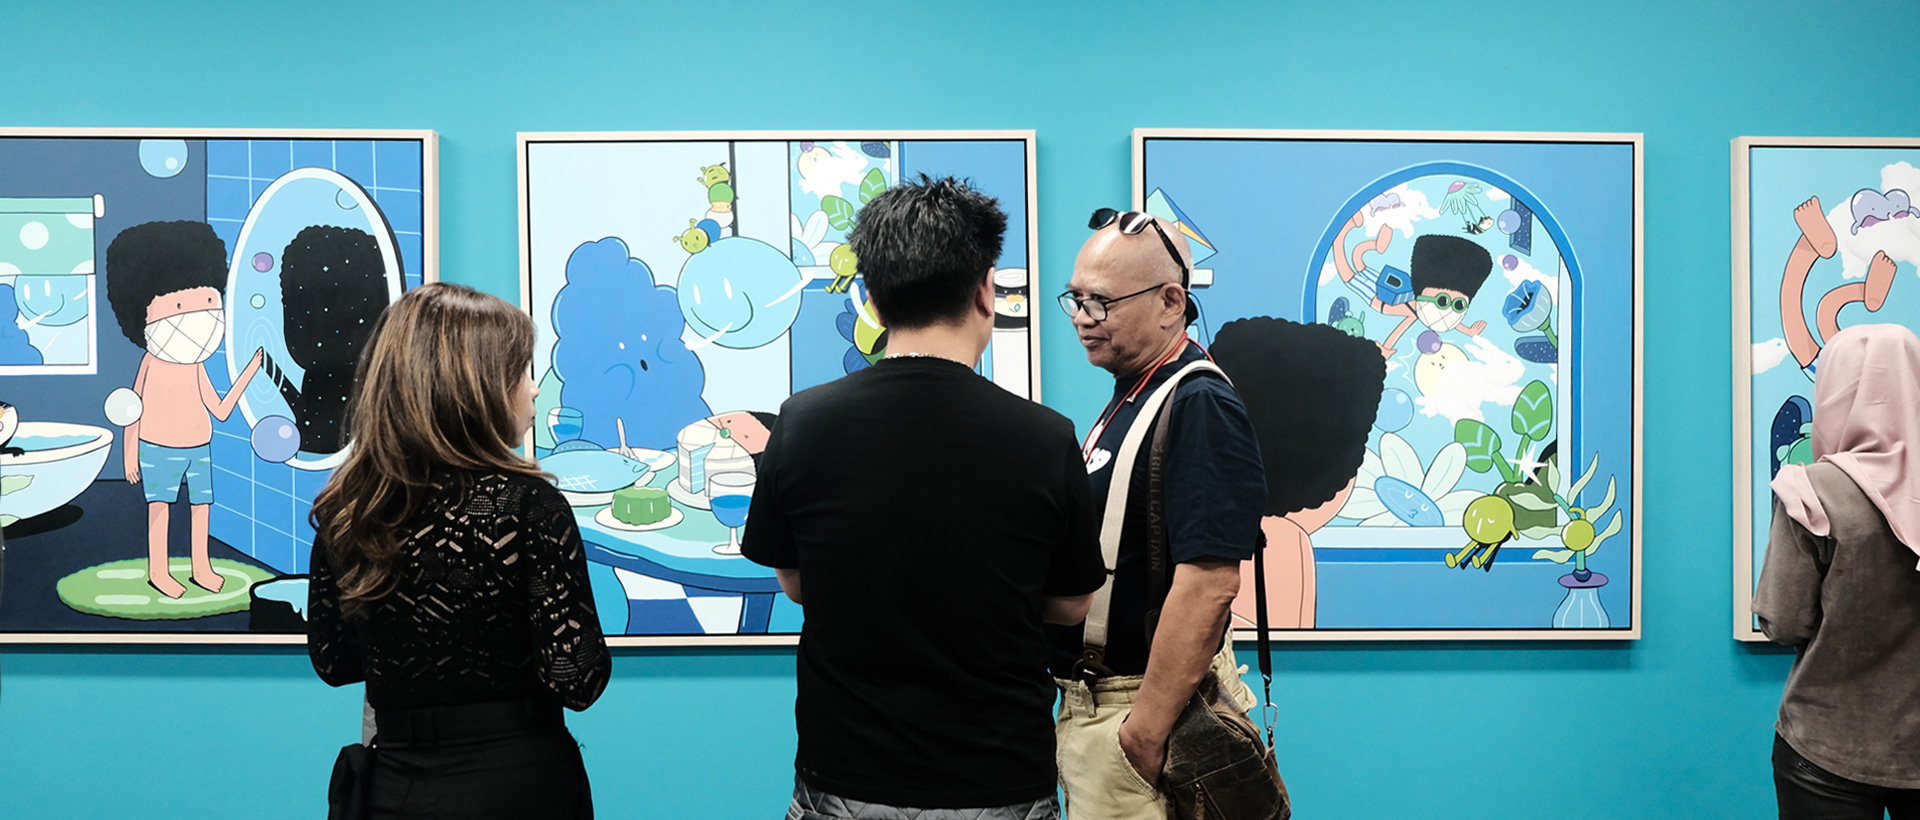 EVOKING EMOTIONS IN HUE: GULA’S JOURNEY FROM STREET ART TO THE BLUE ROOM